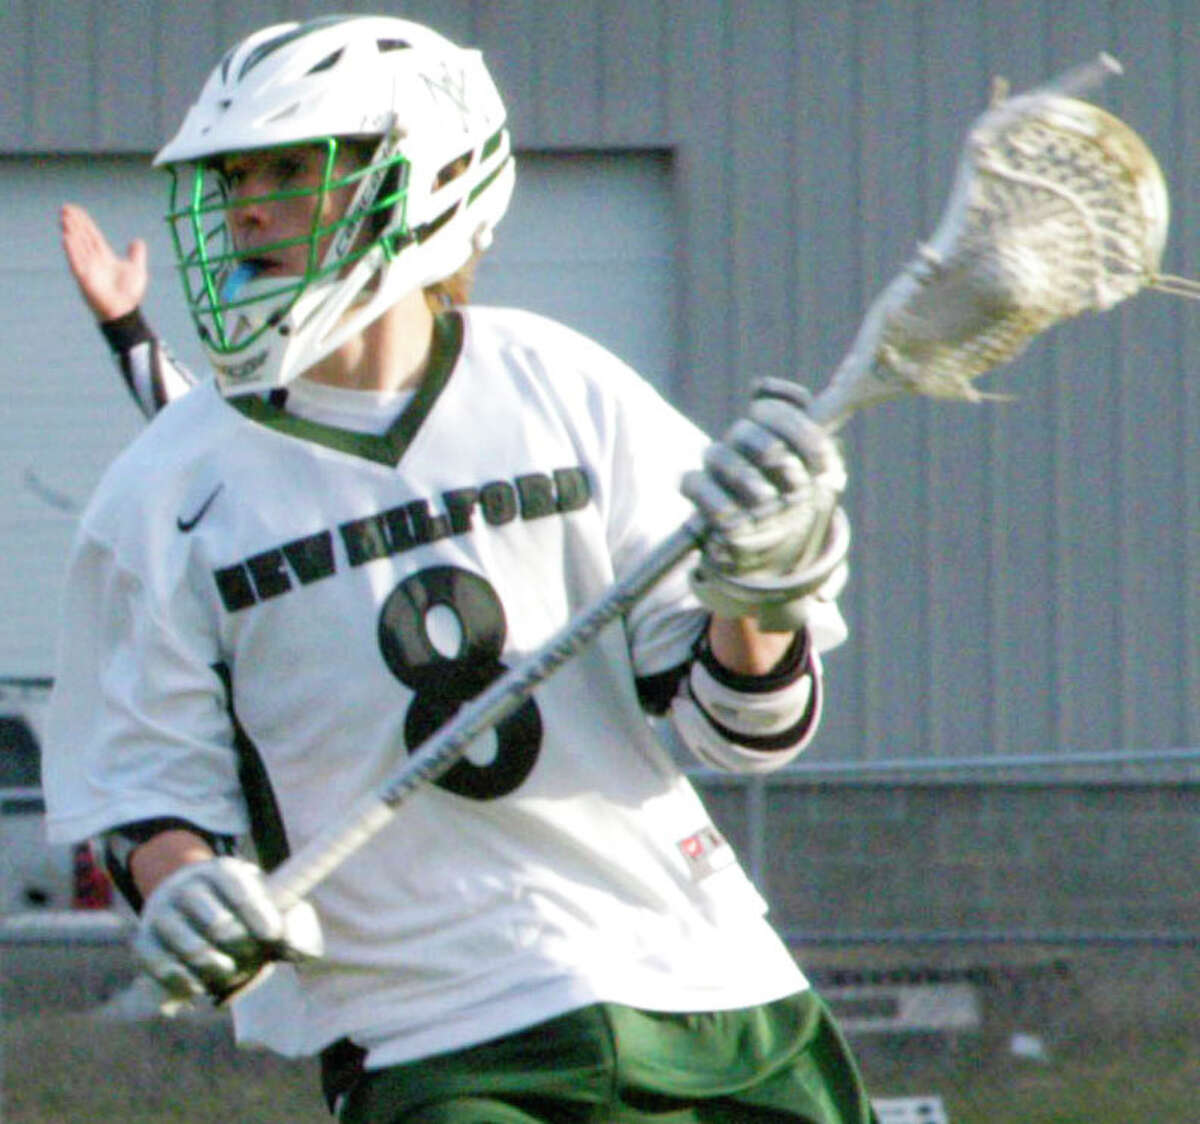 Blaine McMahon, shown here during New Milford High School boys' lacrosse's 11-6 victory over Weston, April 28,2014 at NMHS, and his Grreen Wave teammates have set their sights high this spring.